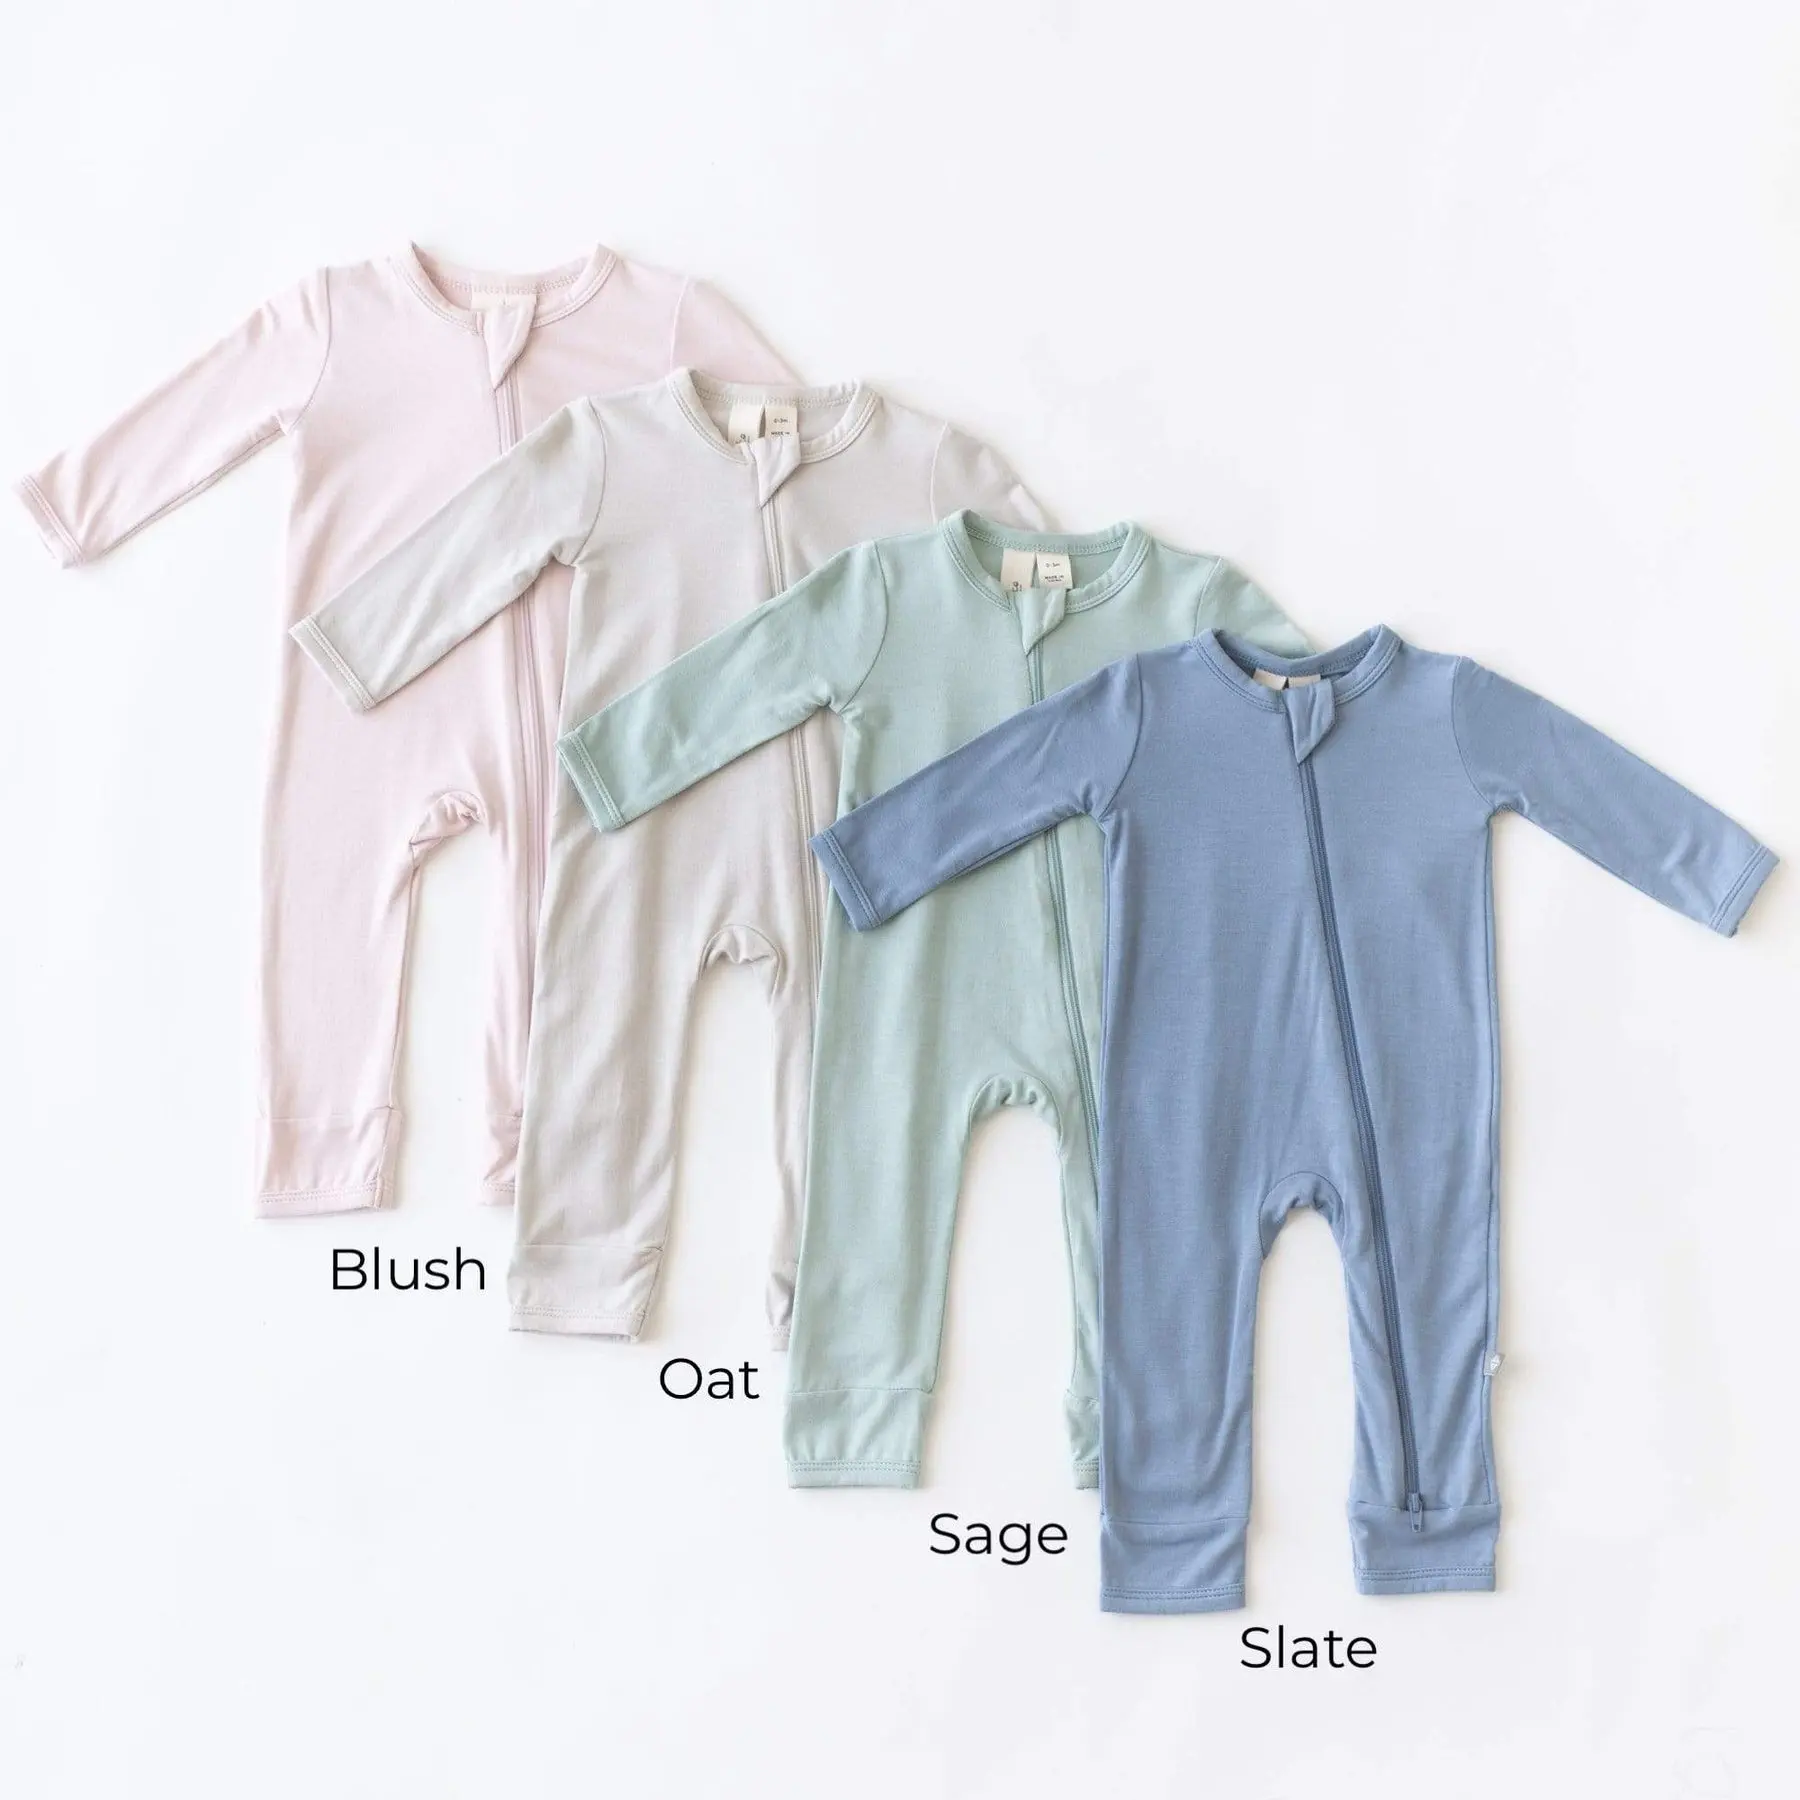 Customized Zipper Closure Solid Color Soft Jumpsuit Toddler Baby 97% Bamboo Rayon+ 3% Spandex Rompers 0-24 Months